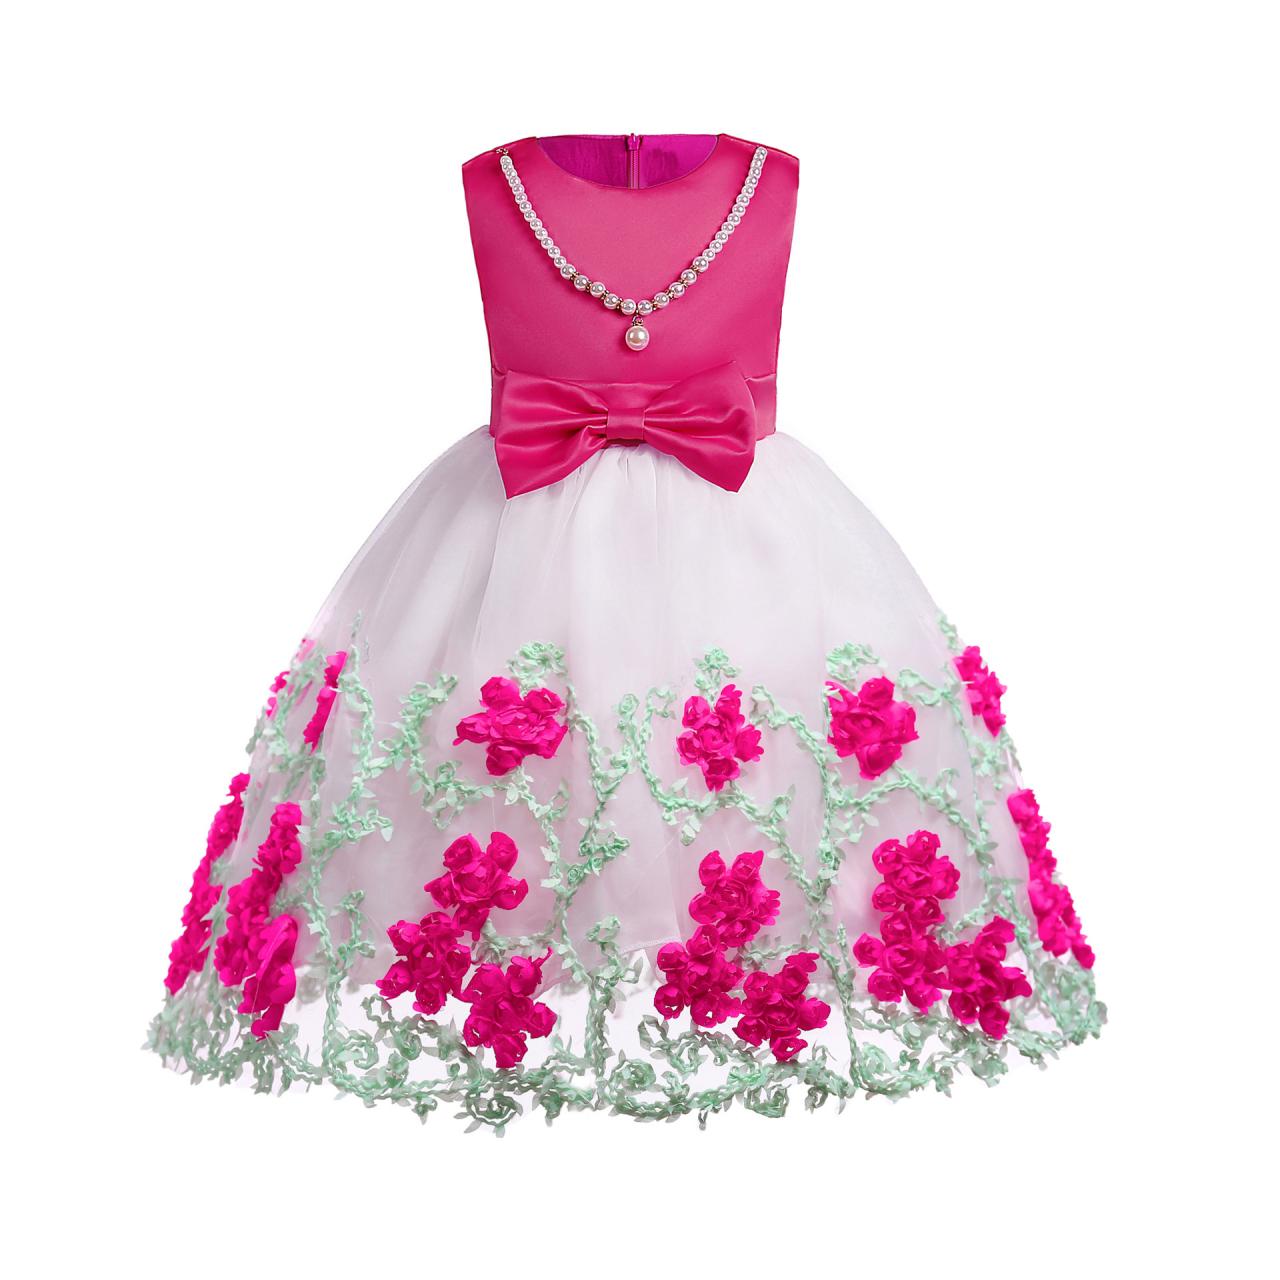 Tea Length Floral Flower Girl Dresses With Bow For Weddings And Party,first Communion Dresses For Girls